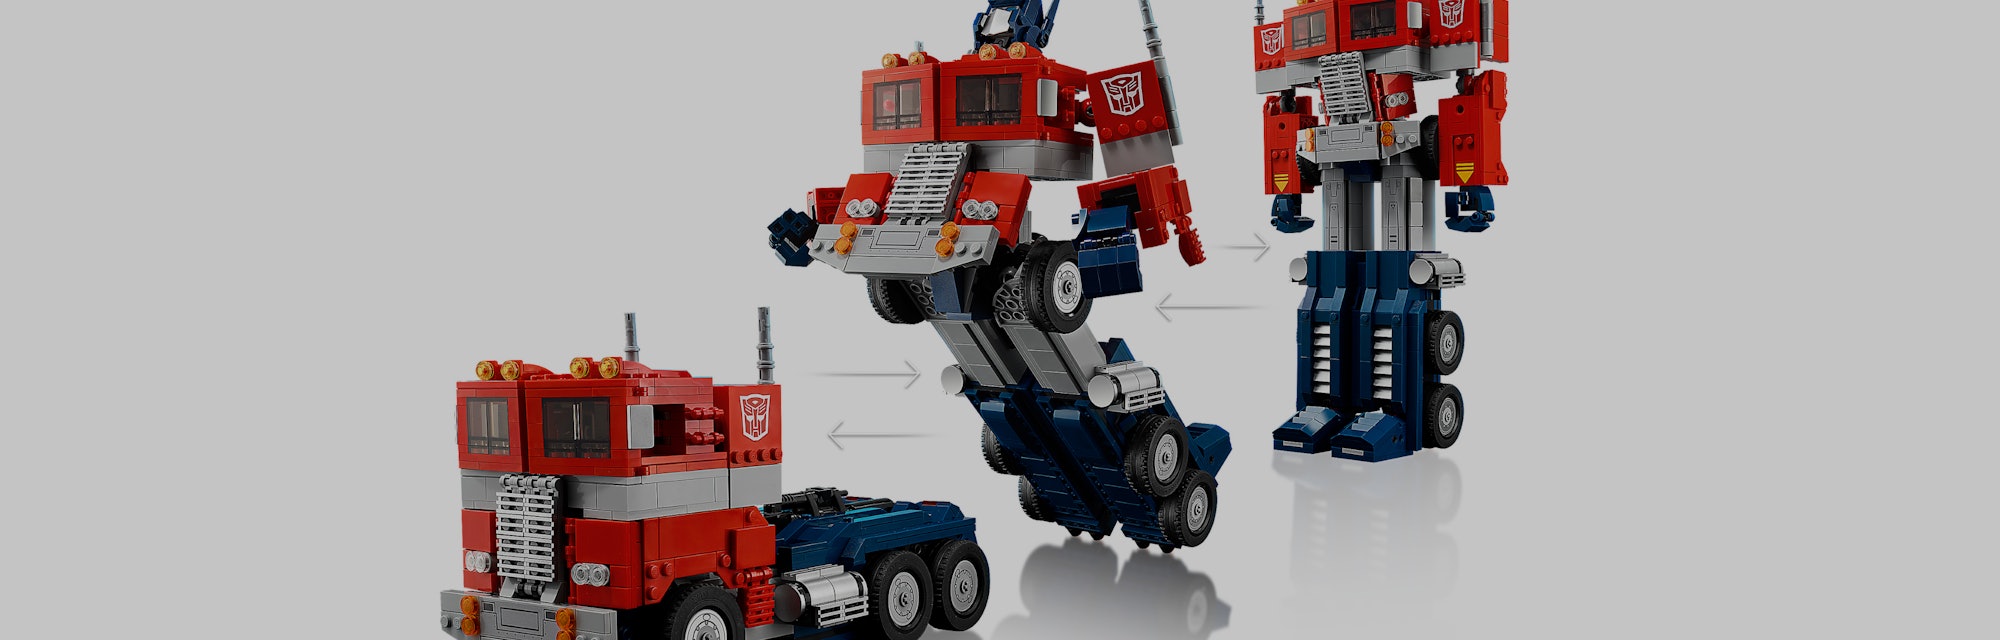 The 6 best Lego sets to build with your dad this Father's Day